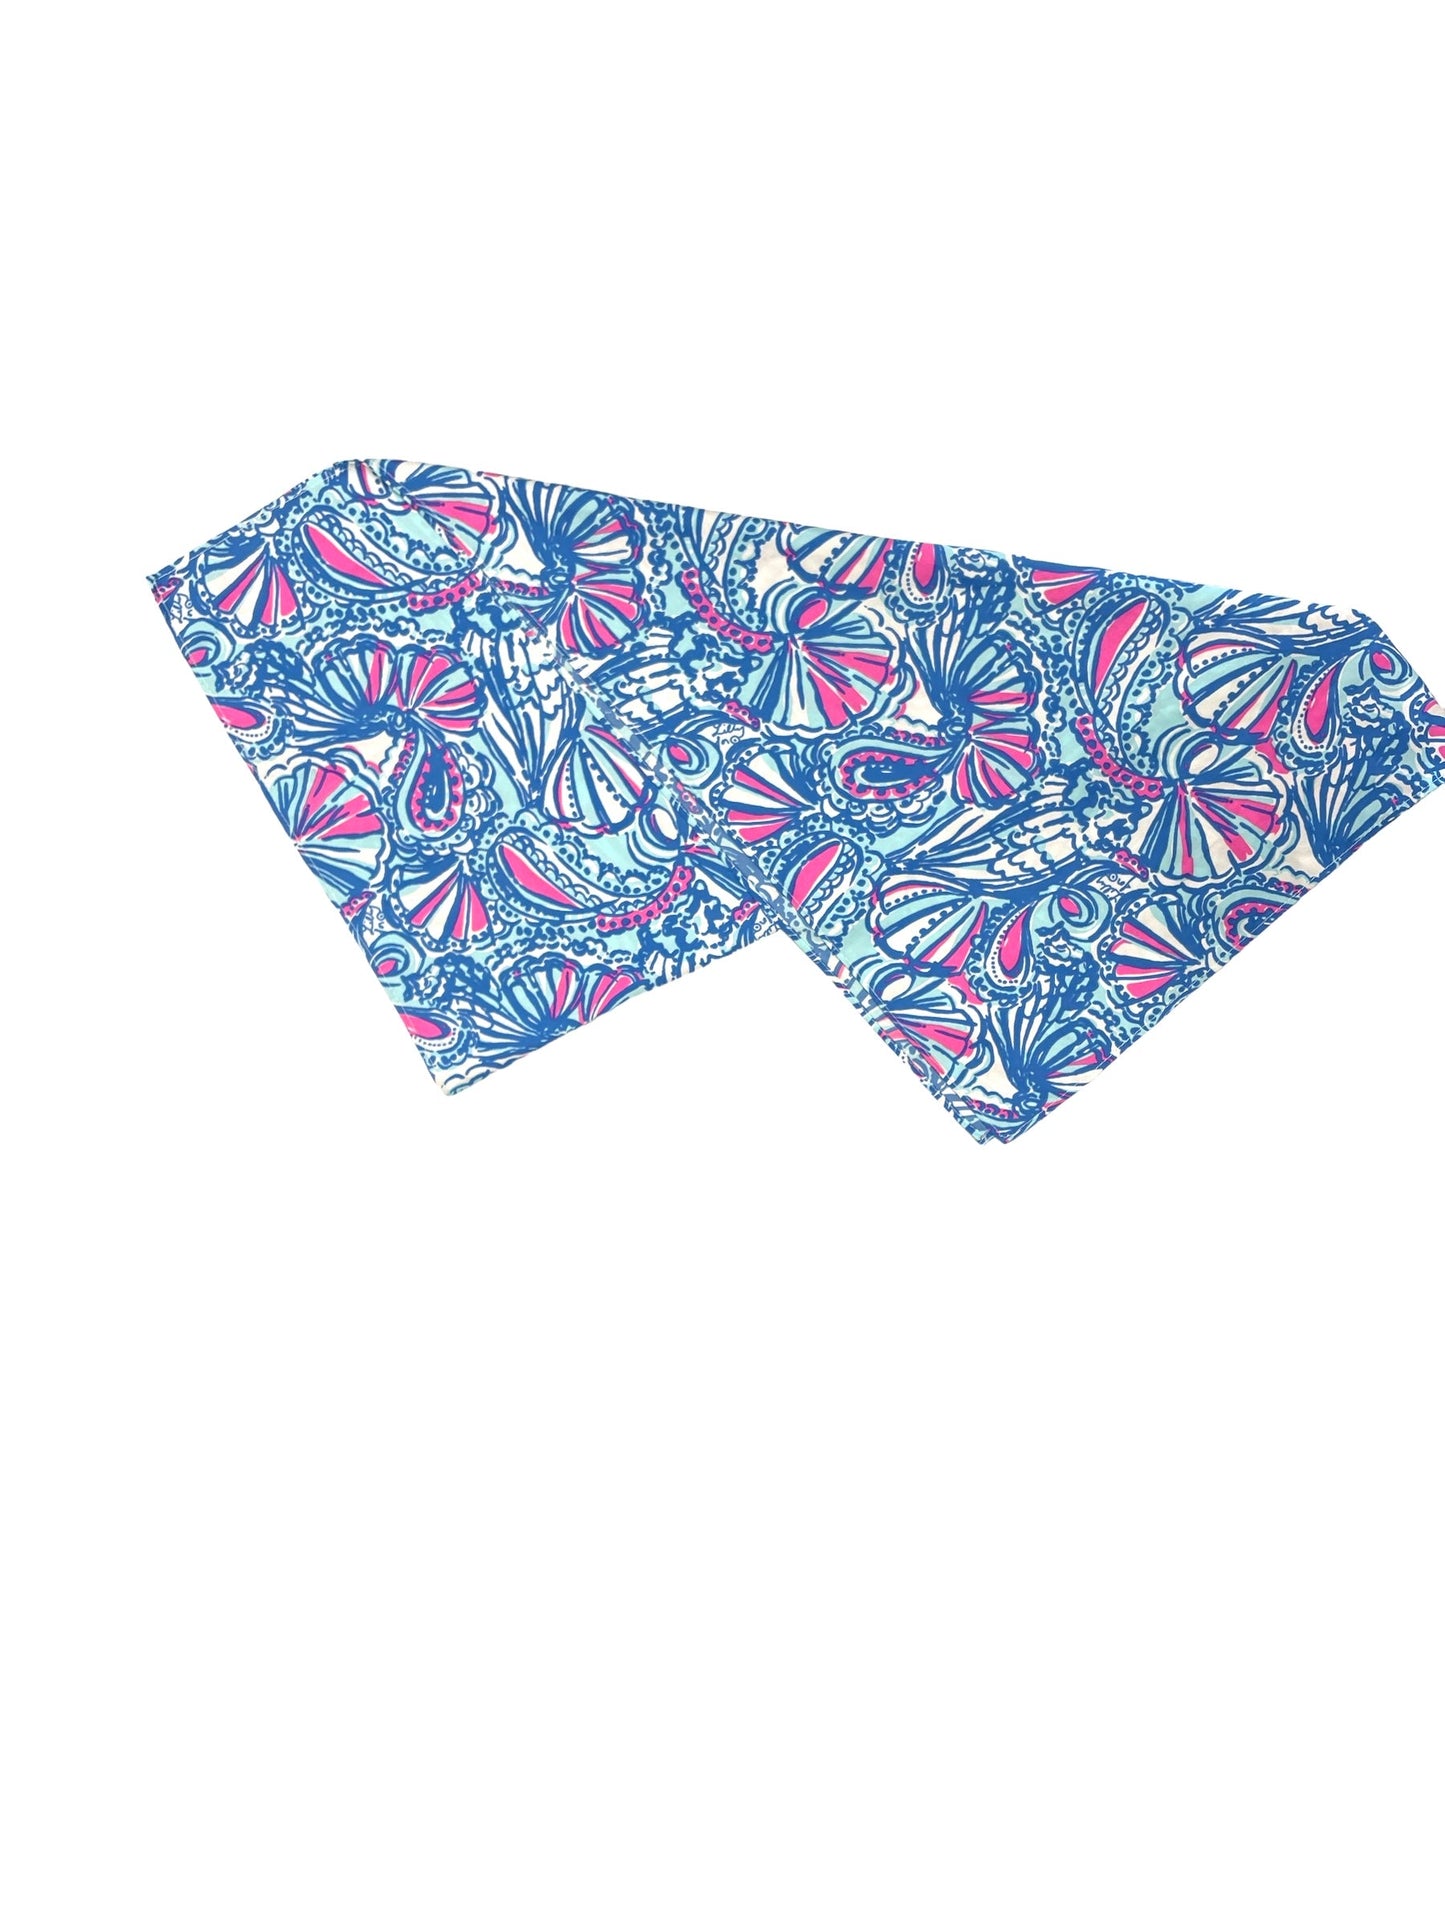 Scarf Square By Lilly Pulitzer